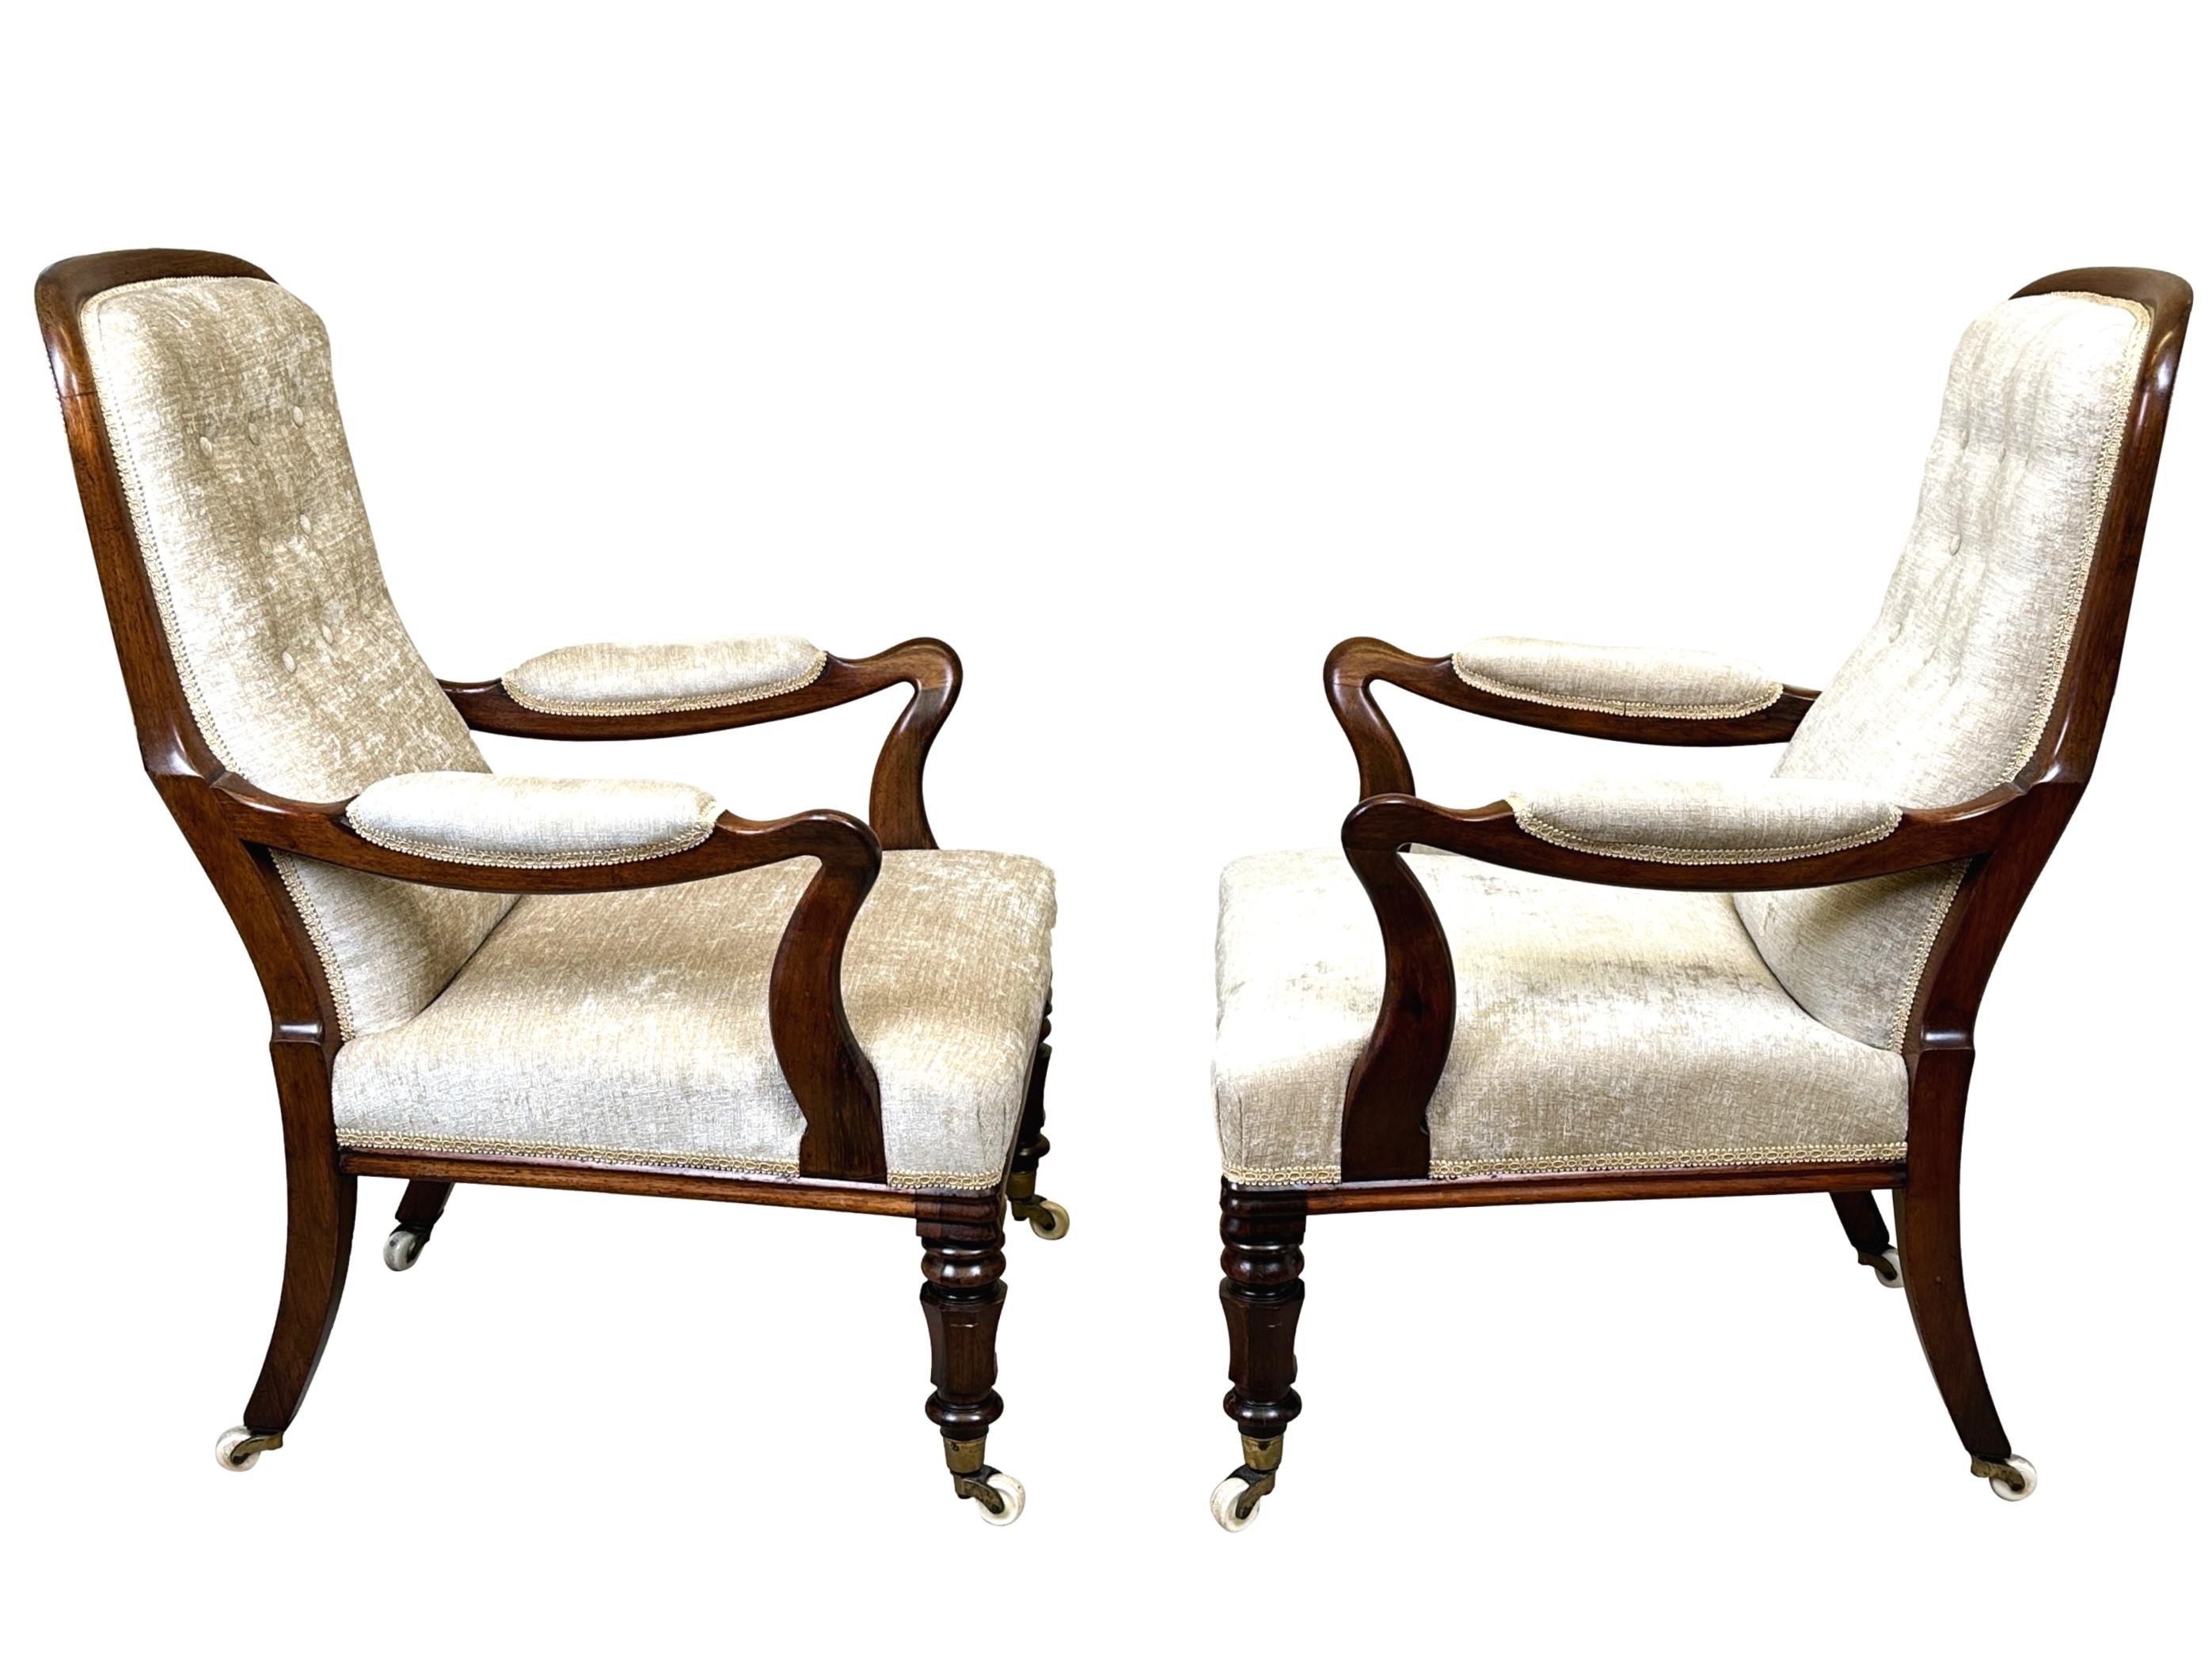 An Exceptional Quality Pair Of Mid 19th Century, Victorian Period,  Rosewood Library Armchairs Of Extremely Good Proportions, Having Attractive Sheperds Crook Shaped Arms Over Generous Seats, Raised On Elegant Turned And Faceted Legs With Original